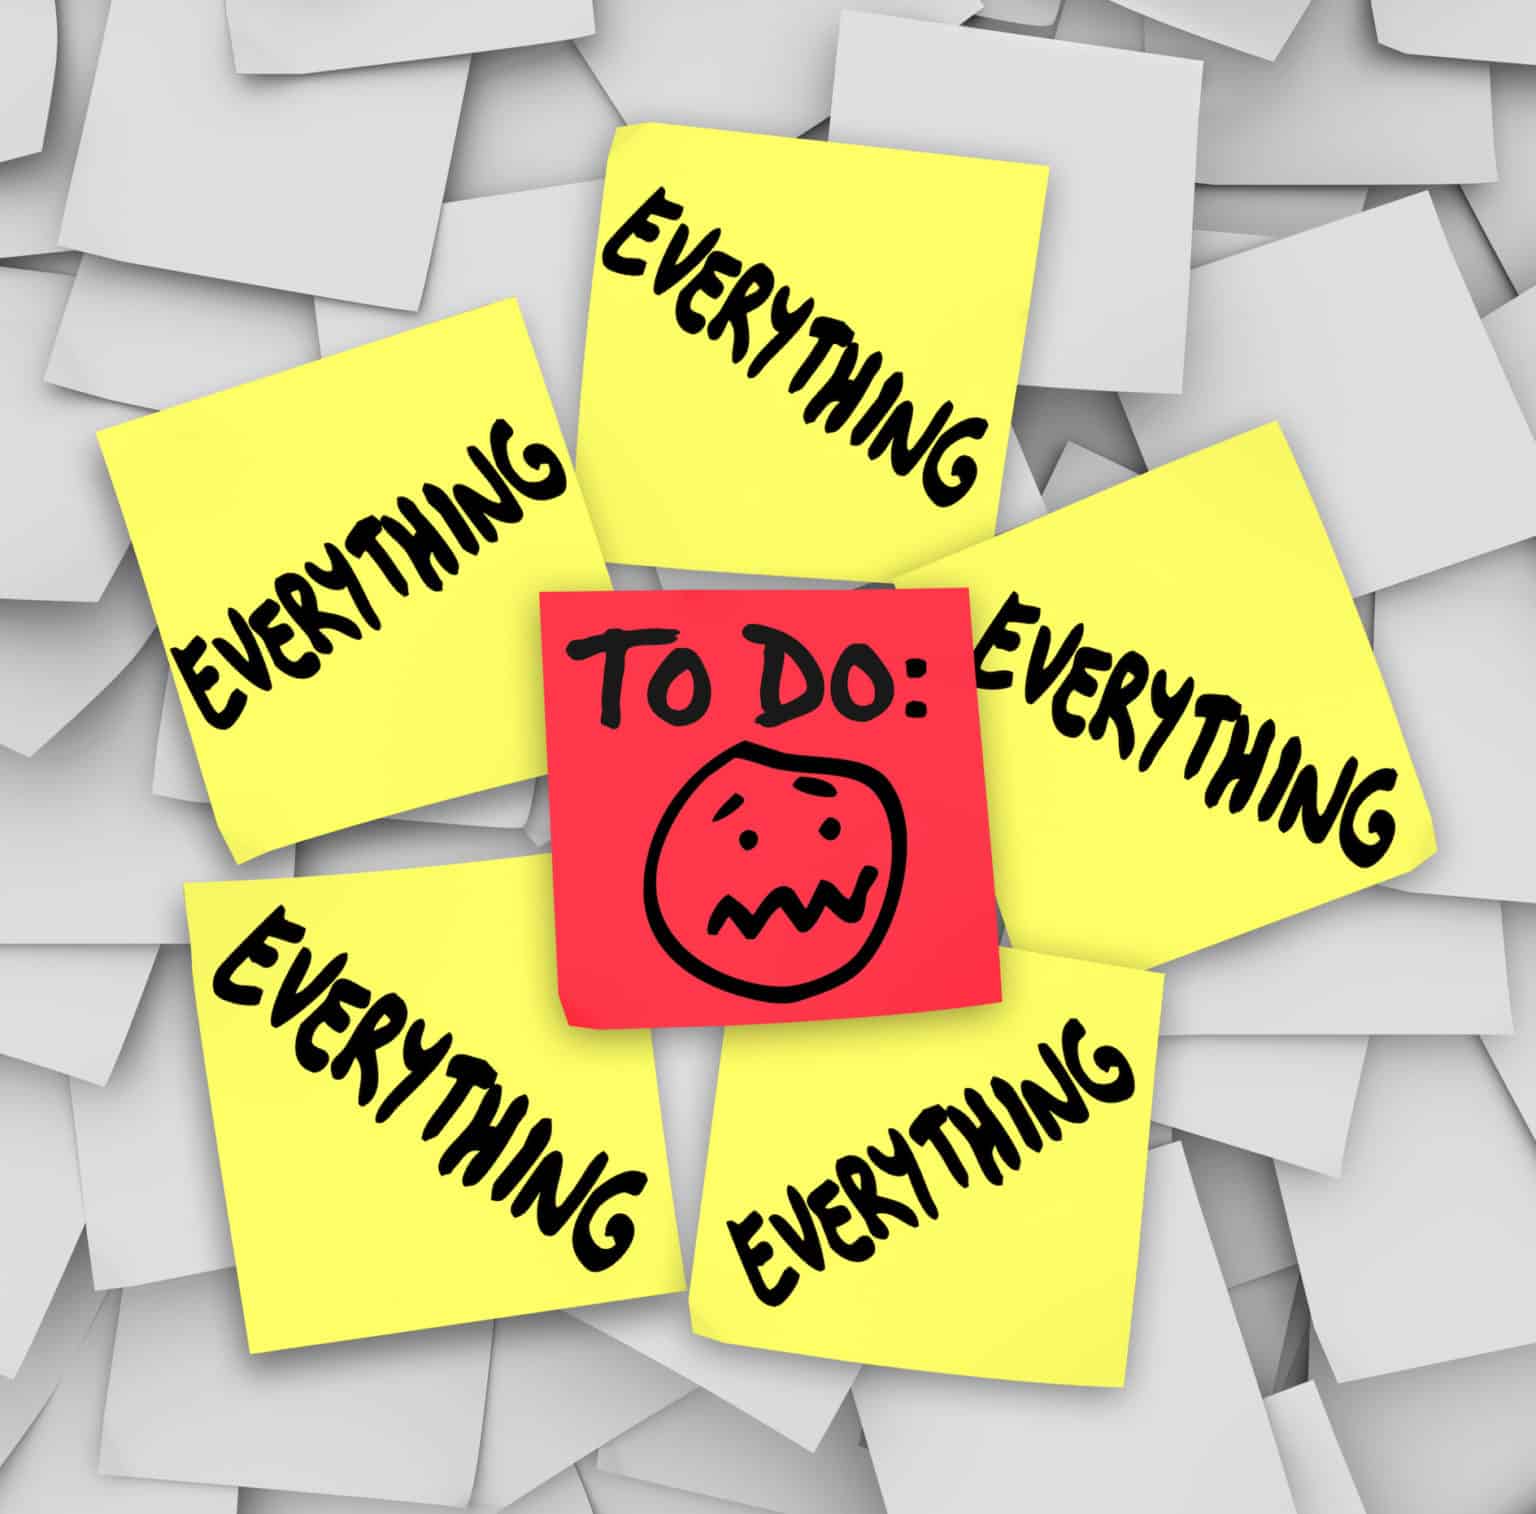 5-reasons-your-to-do-list-may-be-failing-chaos2results-business-coaching